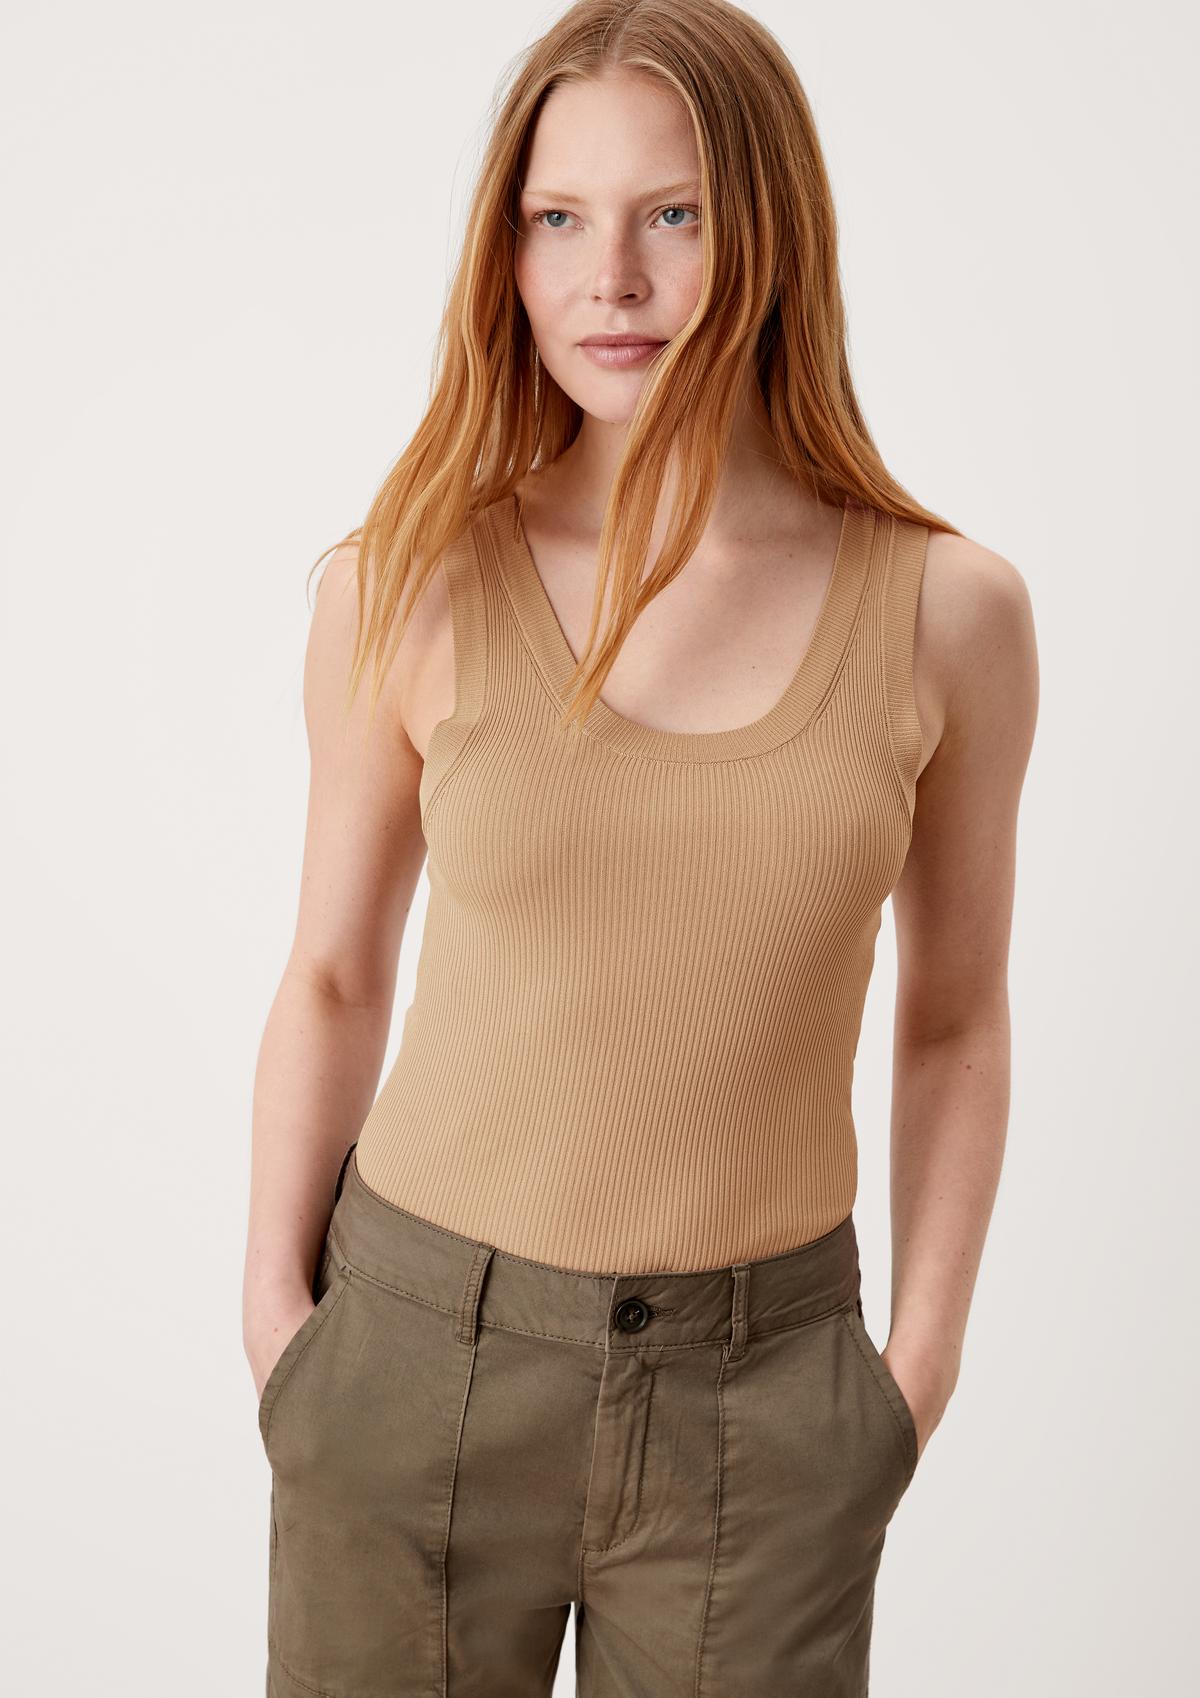 Sleeveless top with a ribbed texture